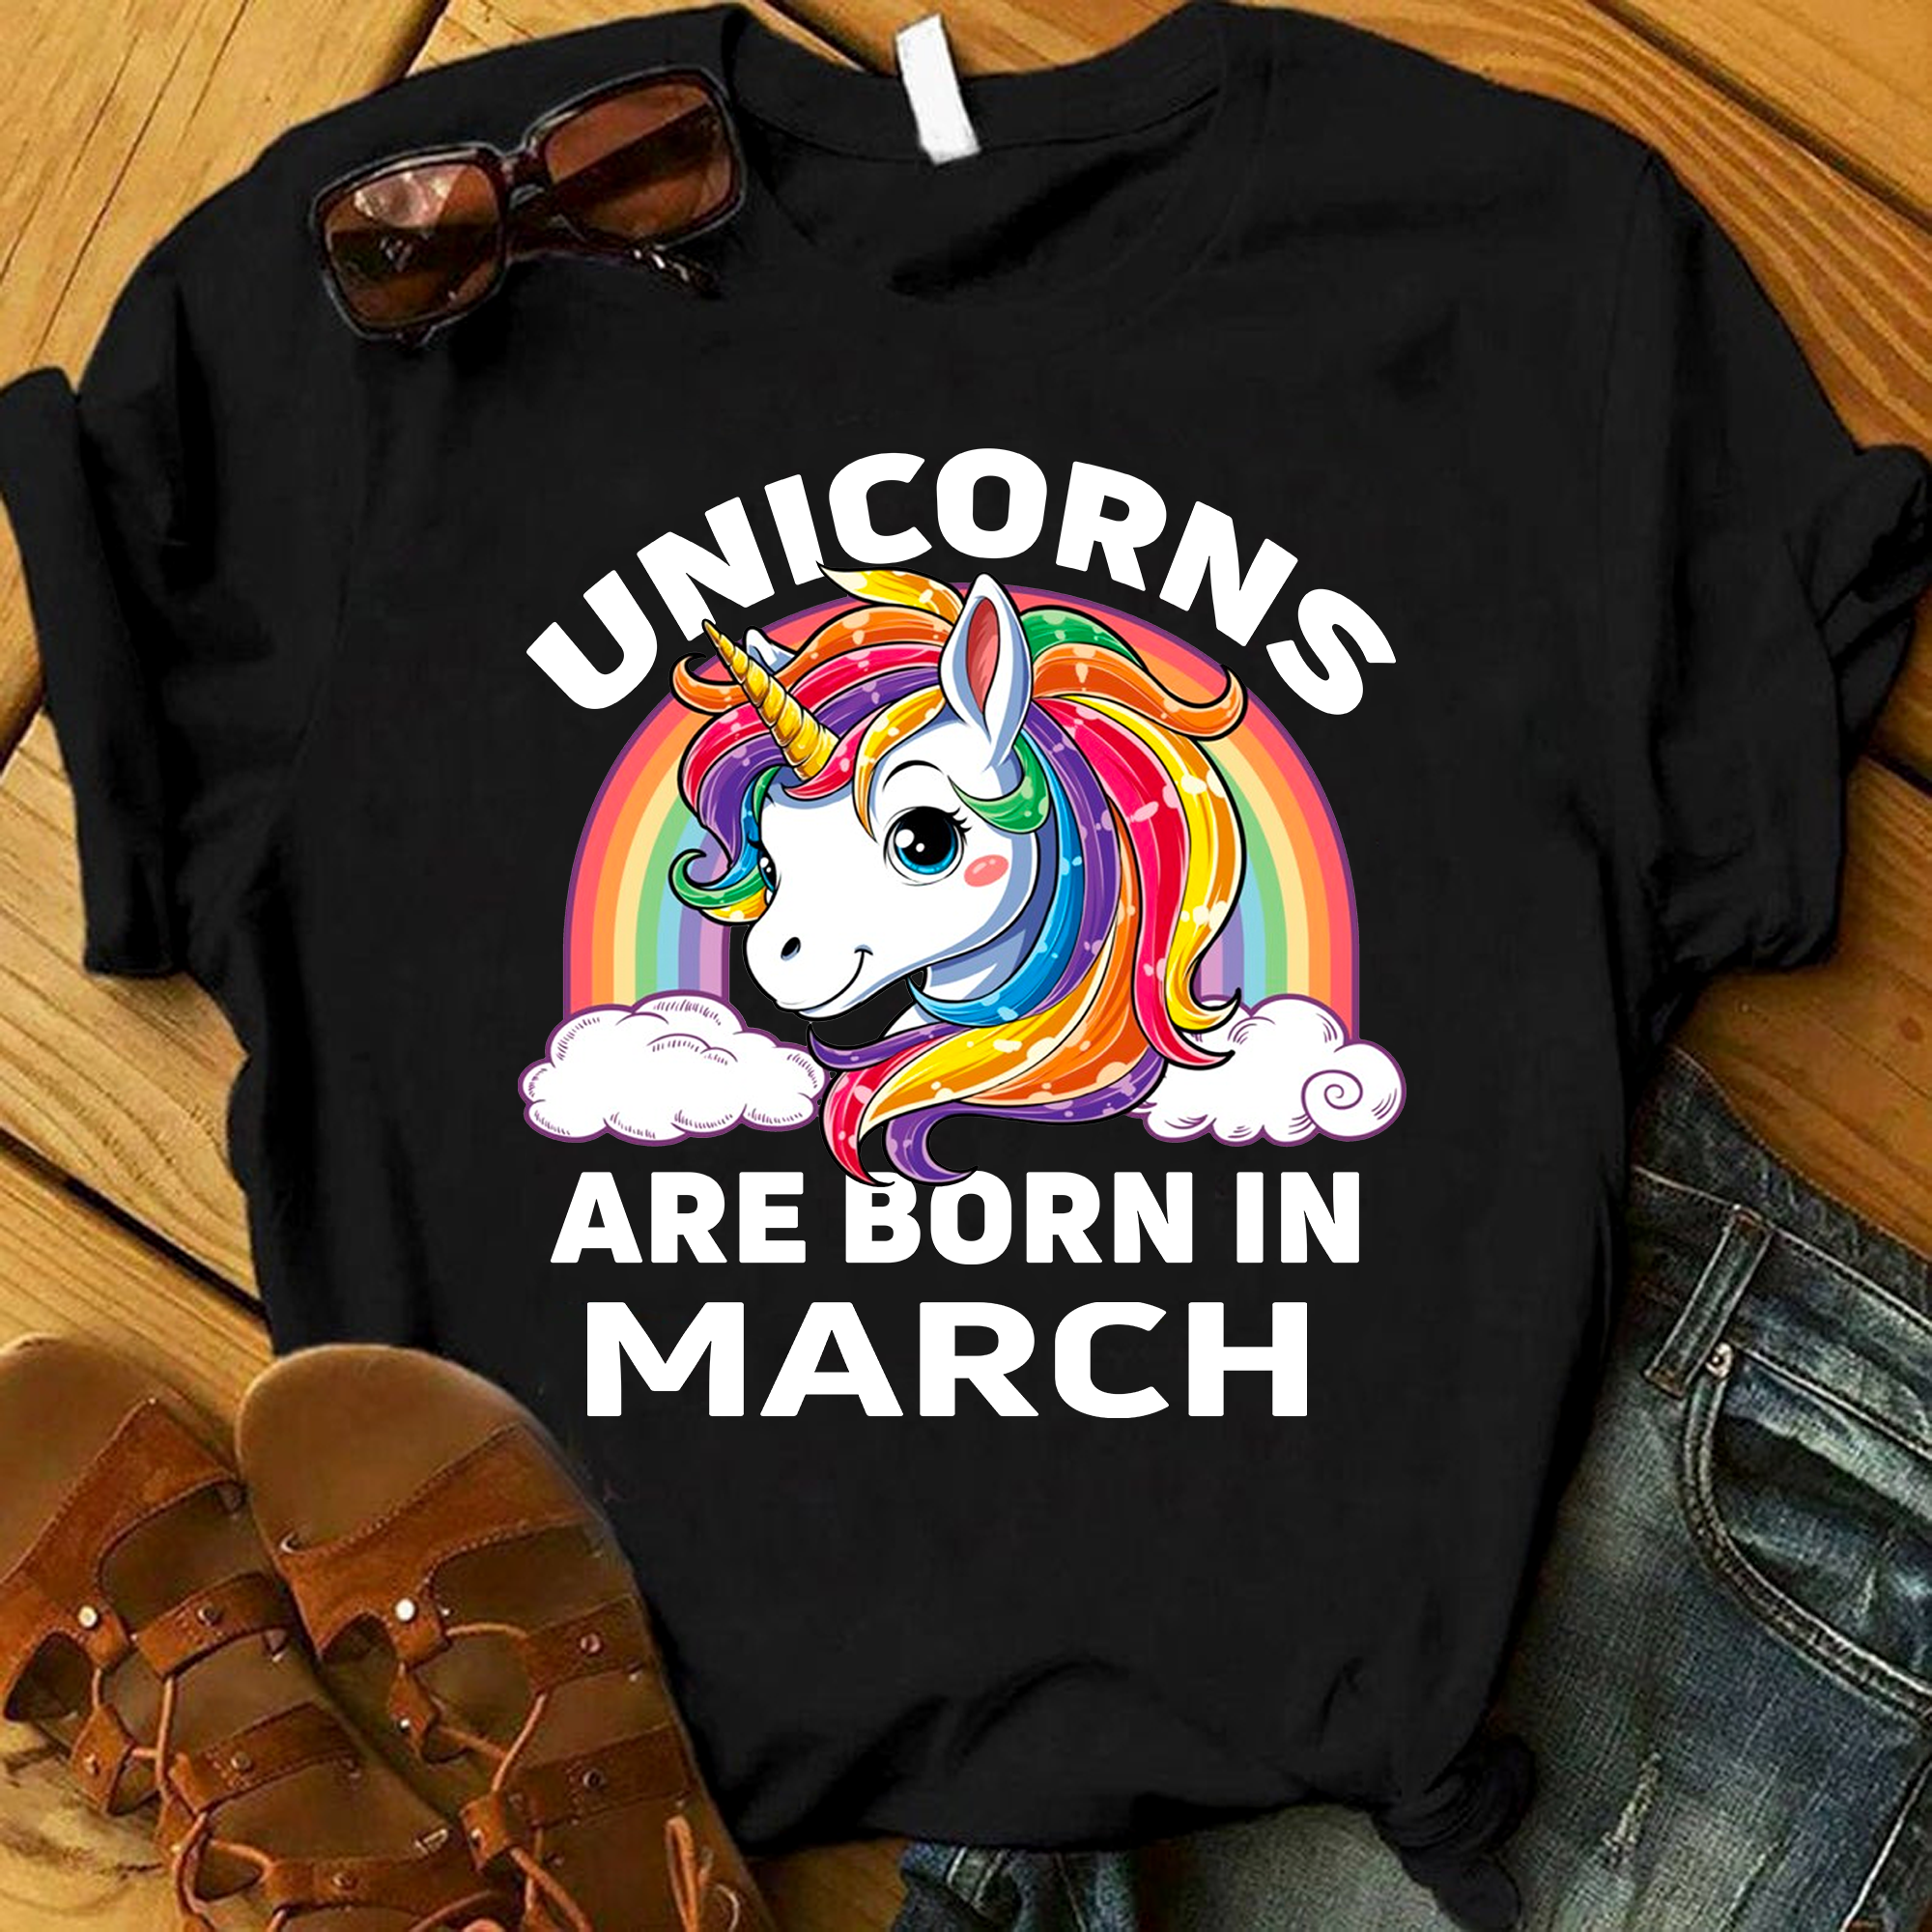 Unicorns Are Born In March Tshirt, Birthday Gift For Unicorn Lovers